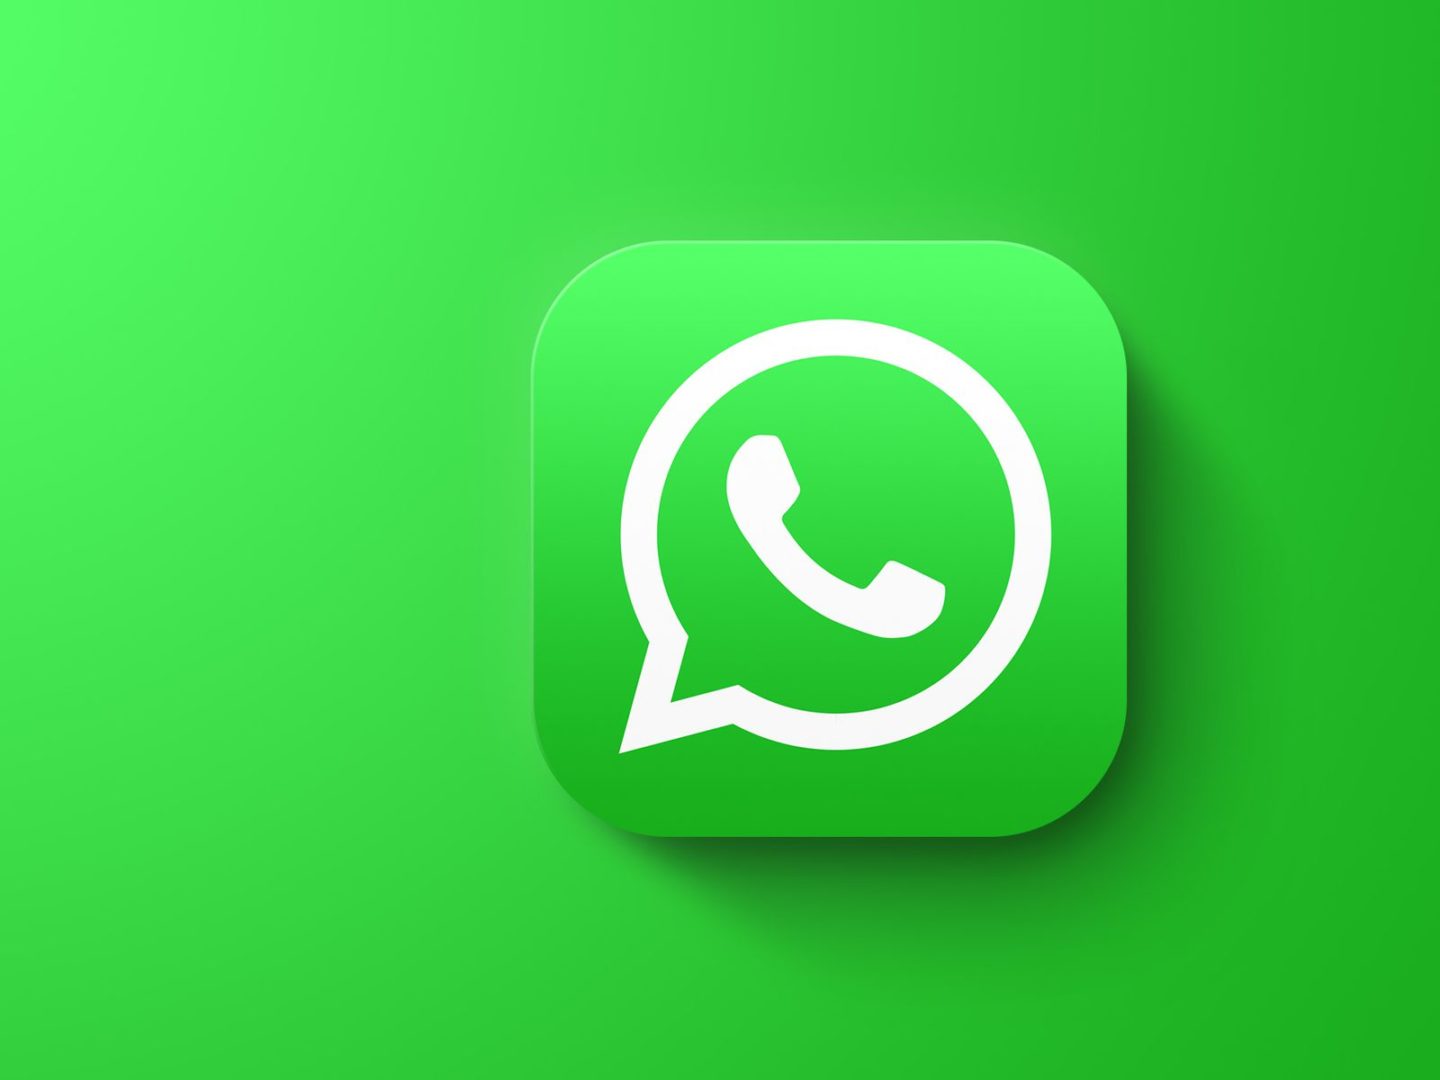 WhatsApp is developing a chat history transfer feature between iOS to Android as part of its ‘Switch to Android’ program